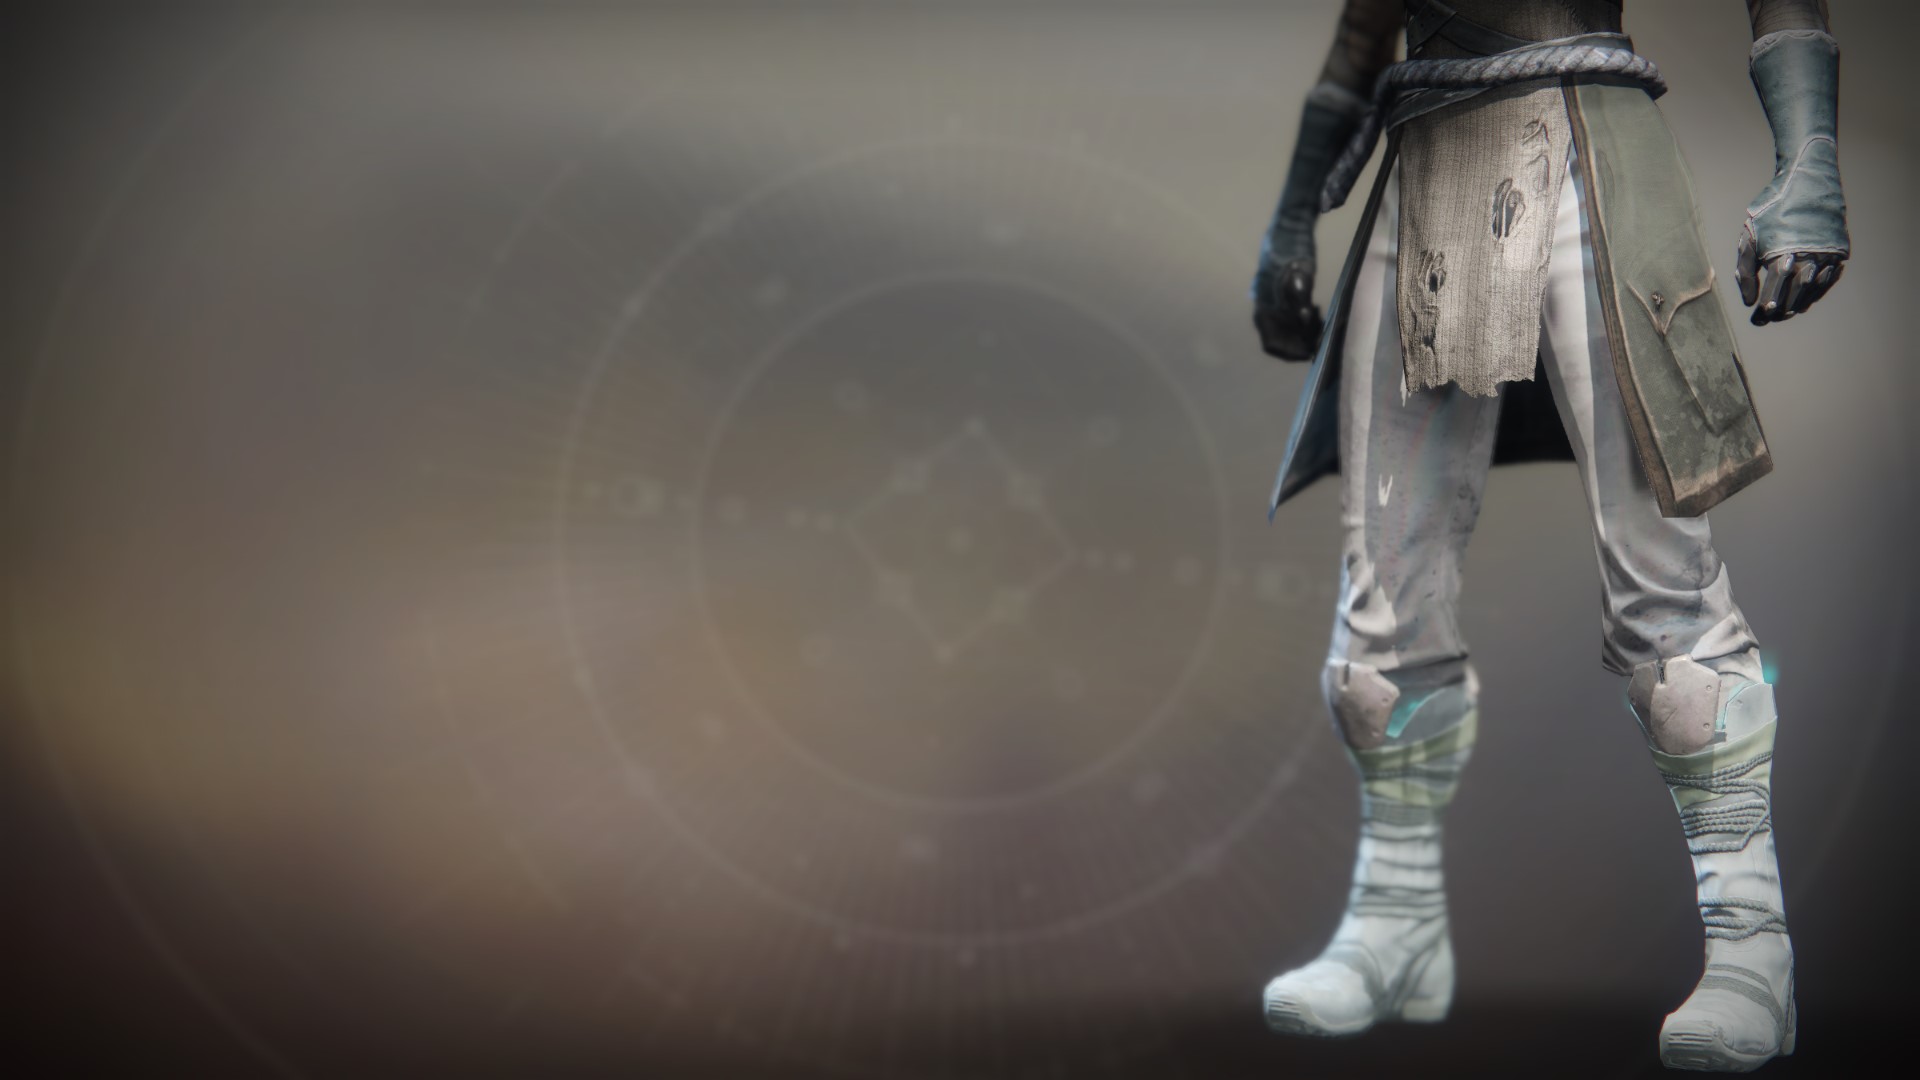 An in-game render of the Focusing Boots.